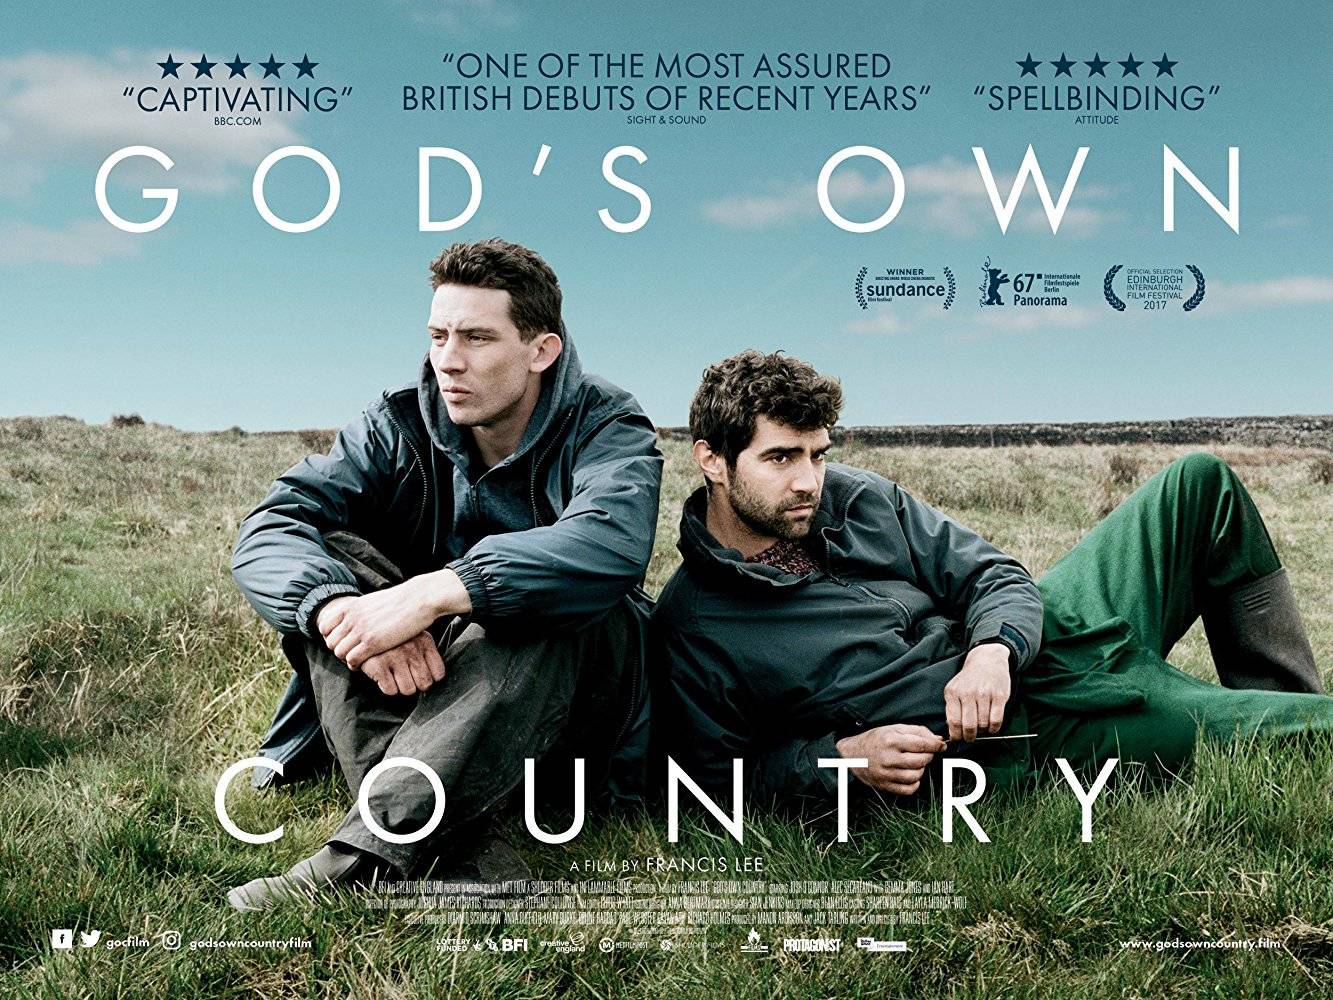 God's Own Country / God's Own Country (2017)